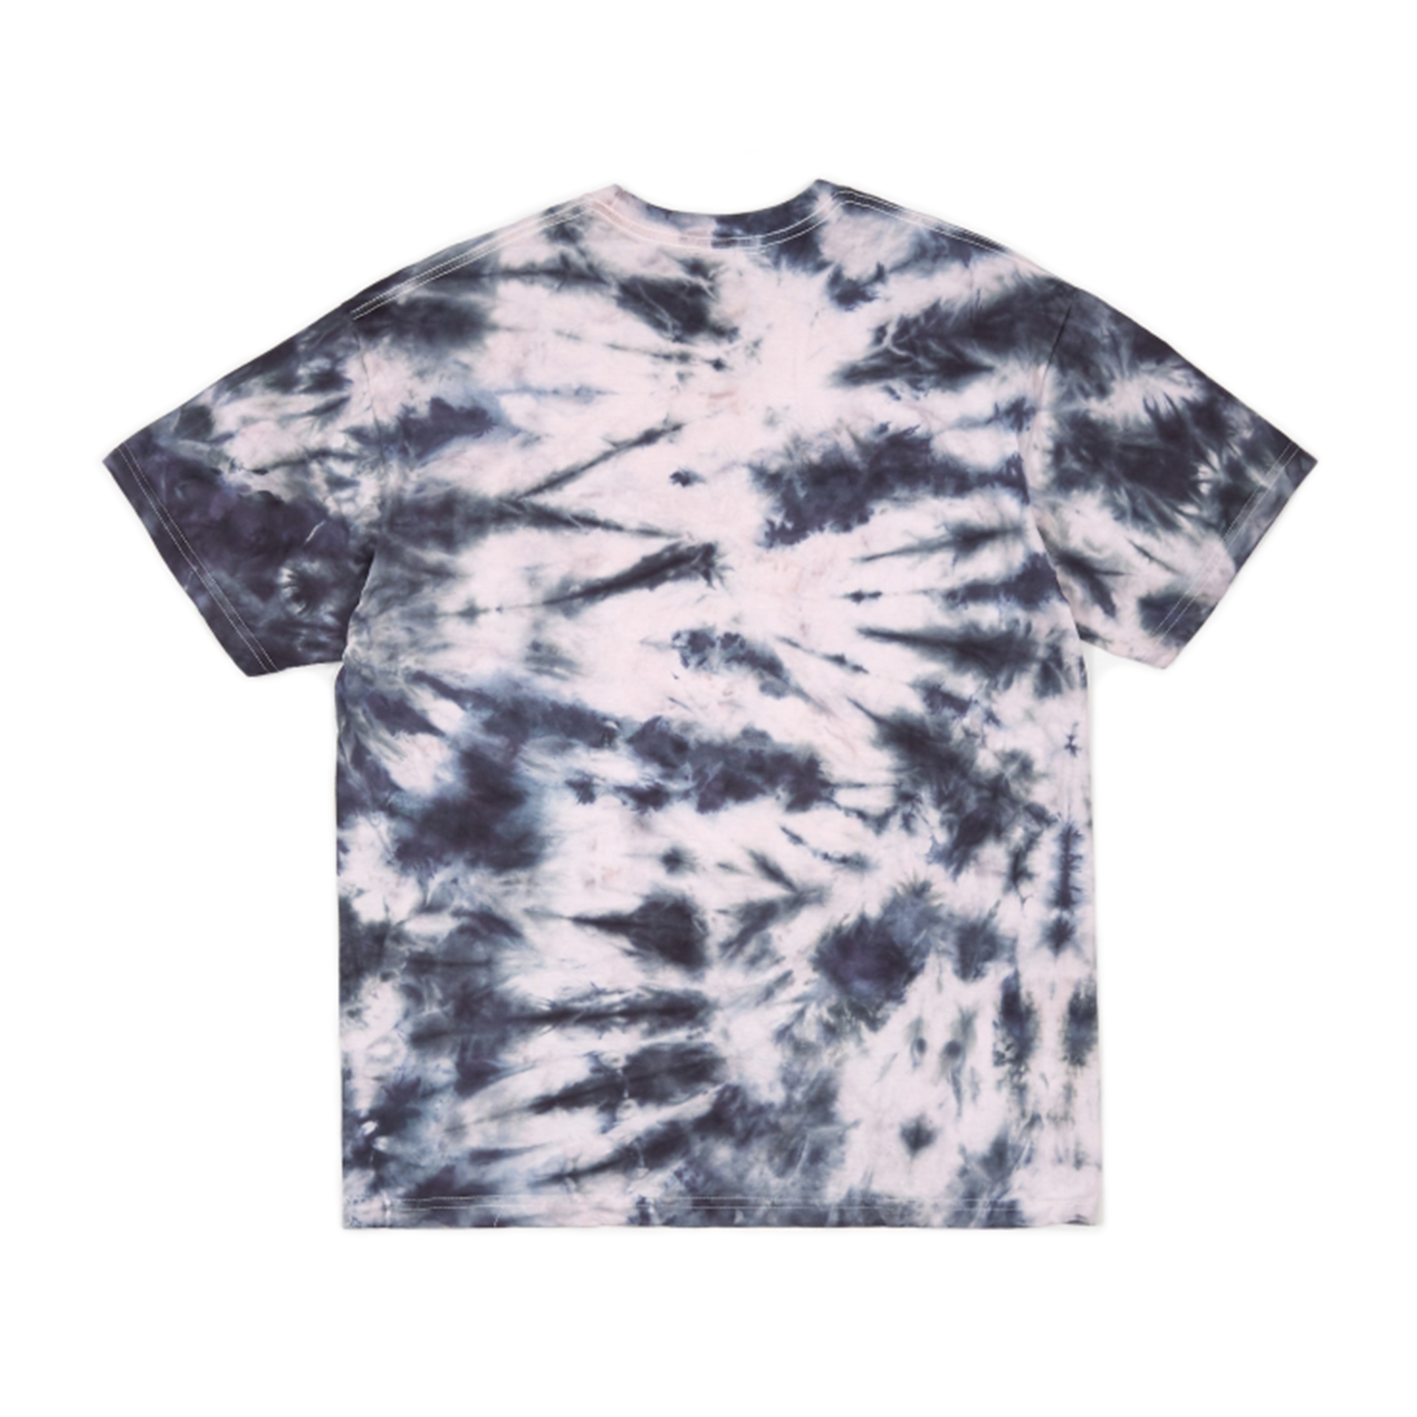 THE NEW ORDER LOGO TIE DYE T-SHIRT — THE NEW ORDER